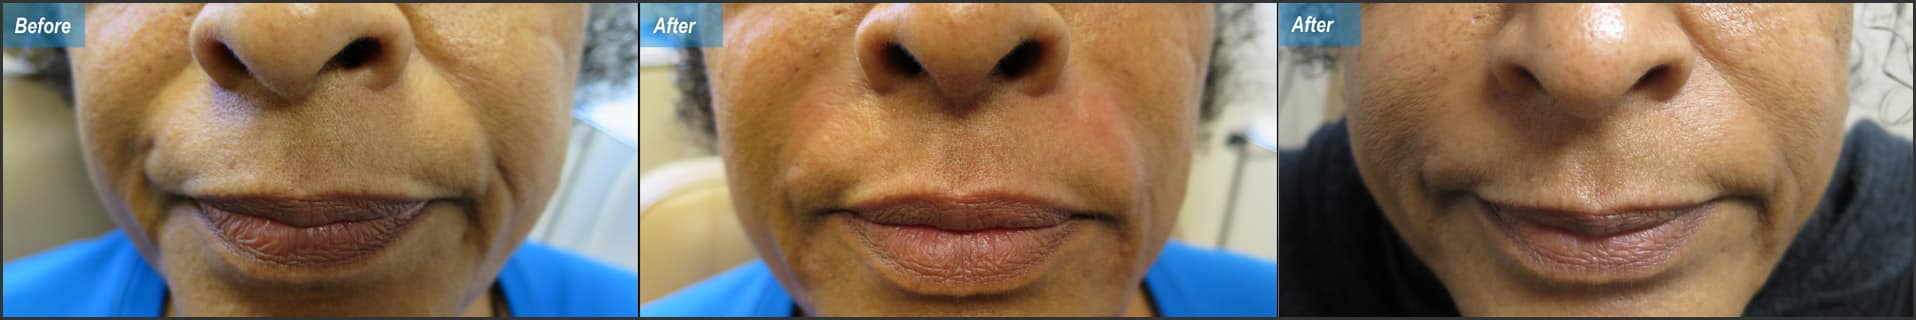 before & after image of dermal fillers to correct nasolabial folds